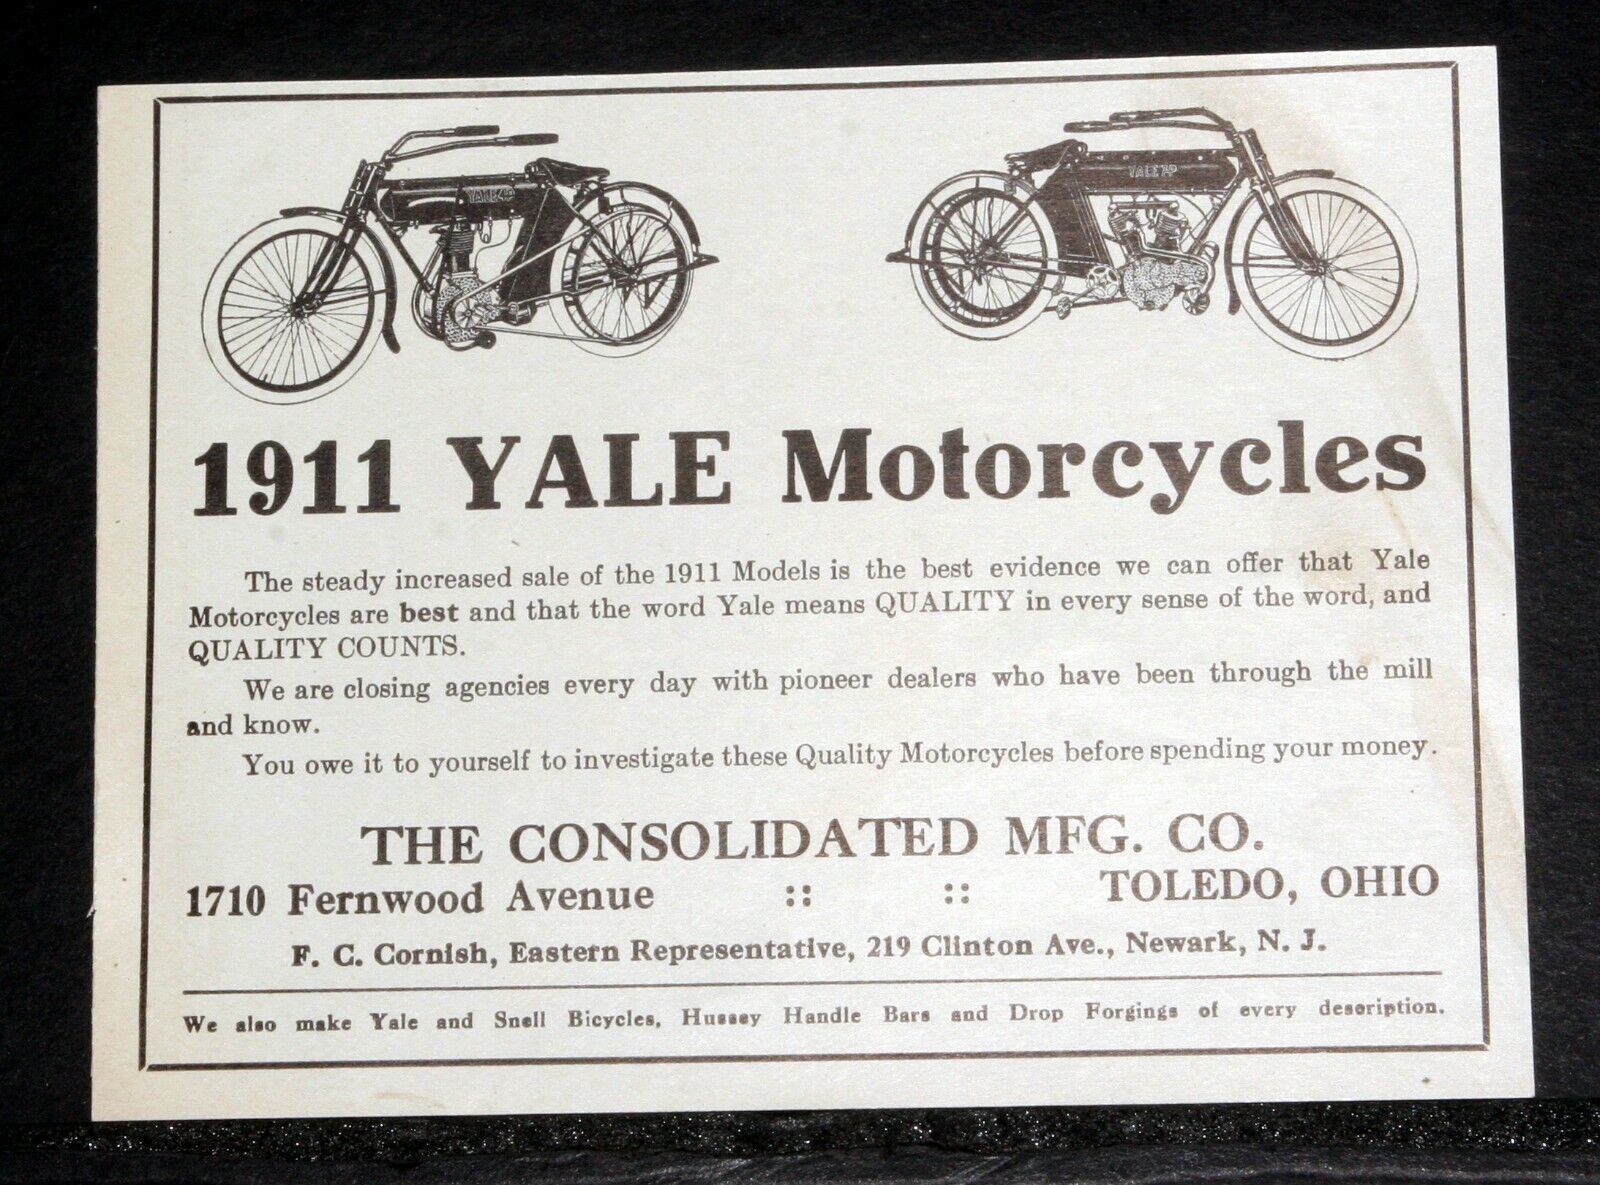 1911 OLD MAGAZINE PRINT AD, 1911 YALE MOTORCYCLES, WITH STEADY INCREASED SALES